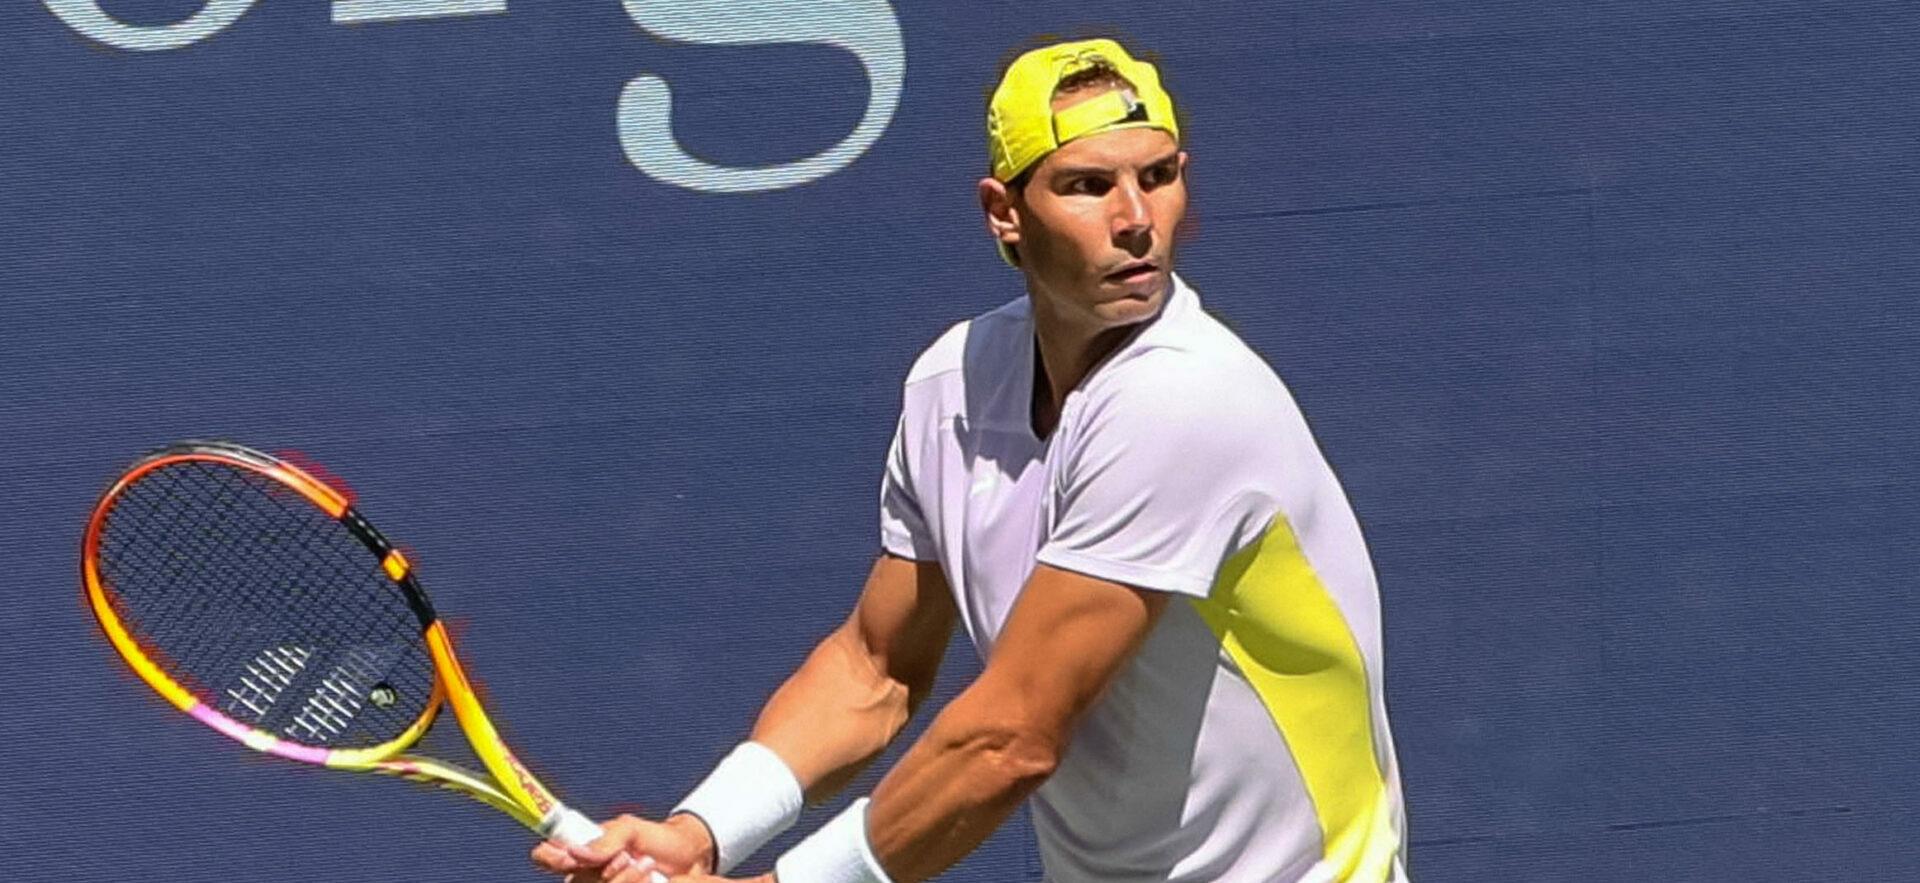 Rafael Nadal’s Racket Mysteriously Disappears During A Game